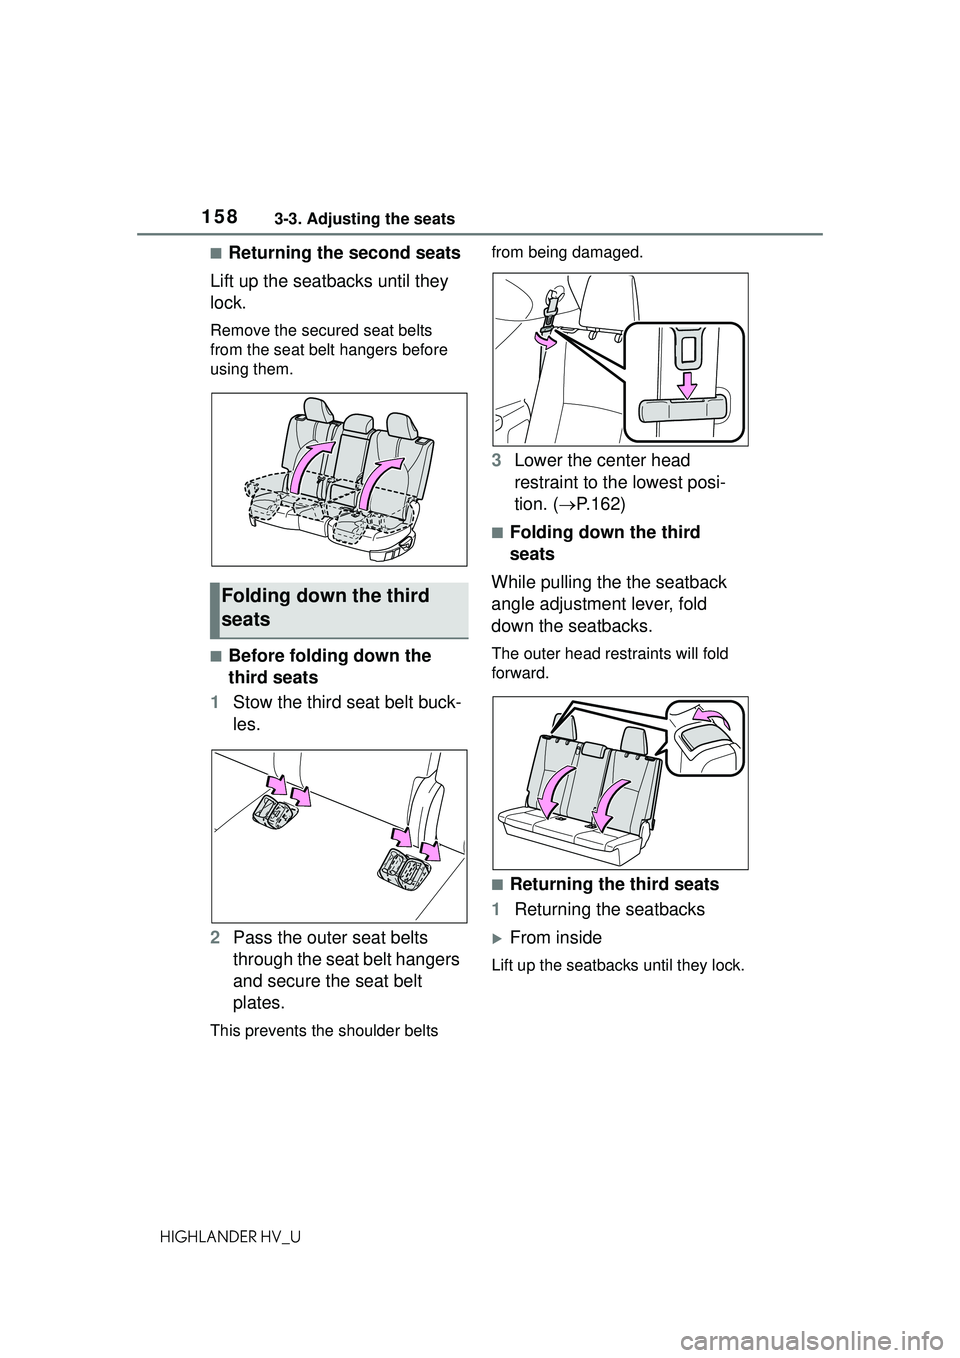 TOYOTA HIGHLANDER HYBRID 2021  Owners Manual (in English) 1583-3. Adjusting the seats
HIGHLANDER HV_U
■Returning the second seats
Lift up the seatbacks until they 
lock.
Remove the secu red seat belts 
from the seat belt hangers before 
using them.
■Befo